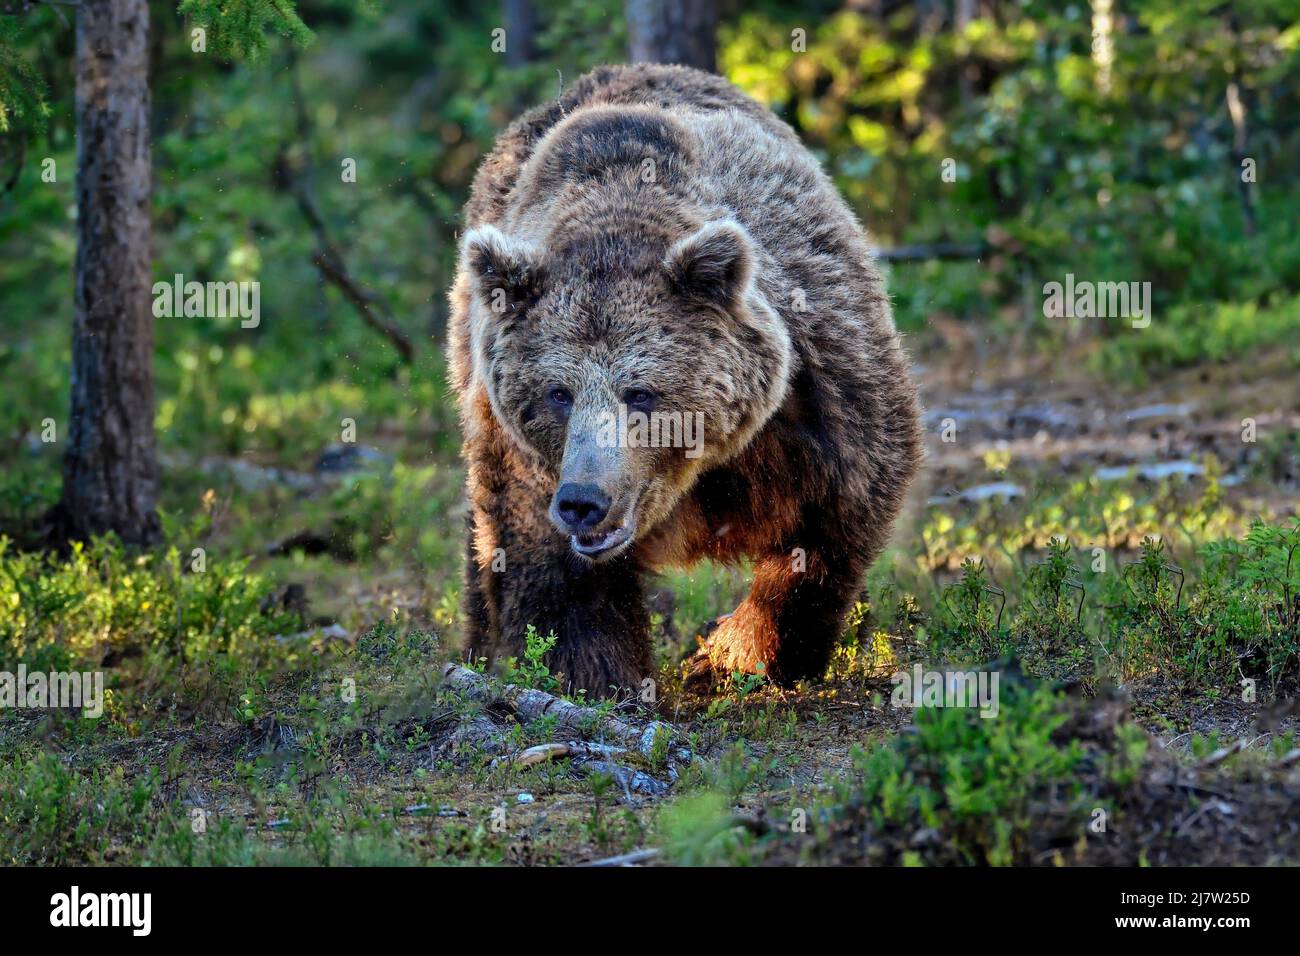 Aggravated male bear on the move Stock Photo